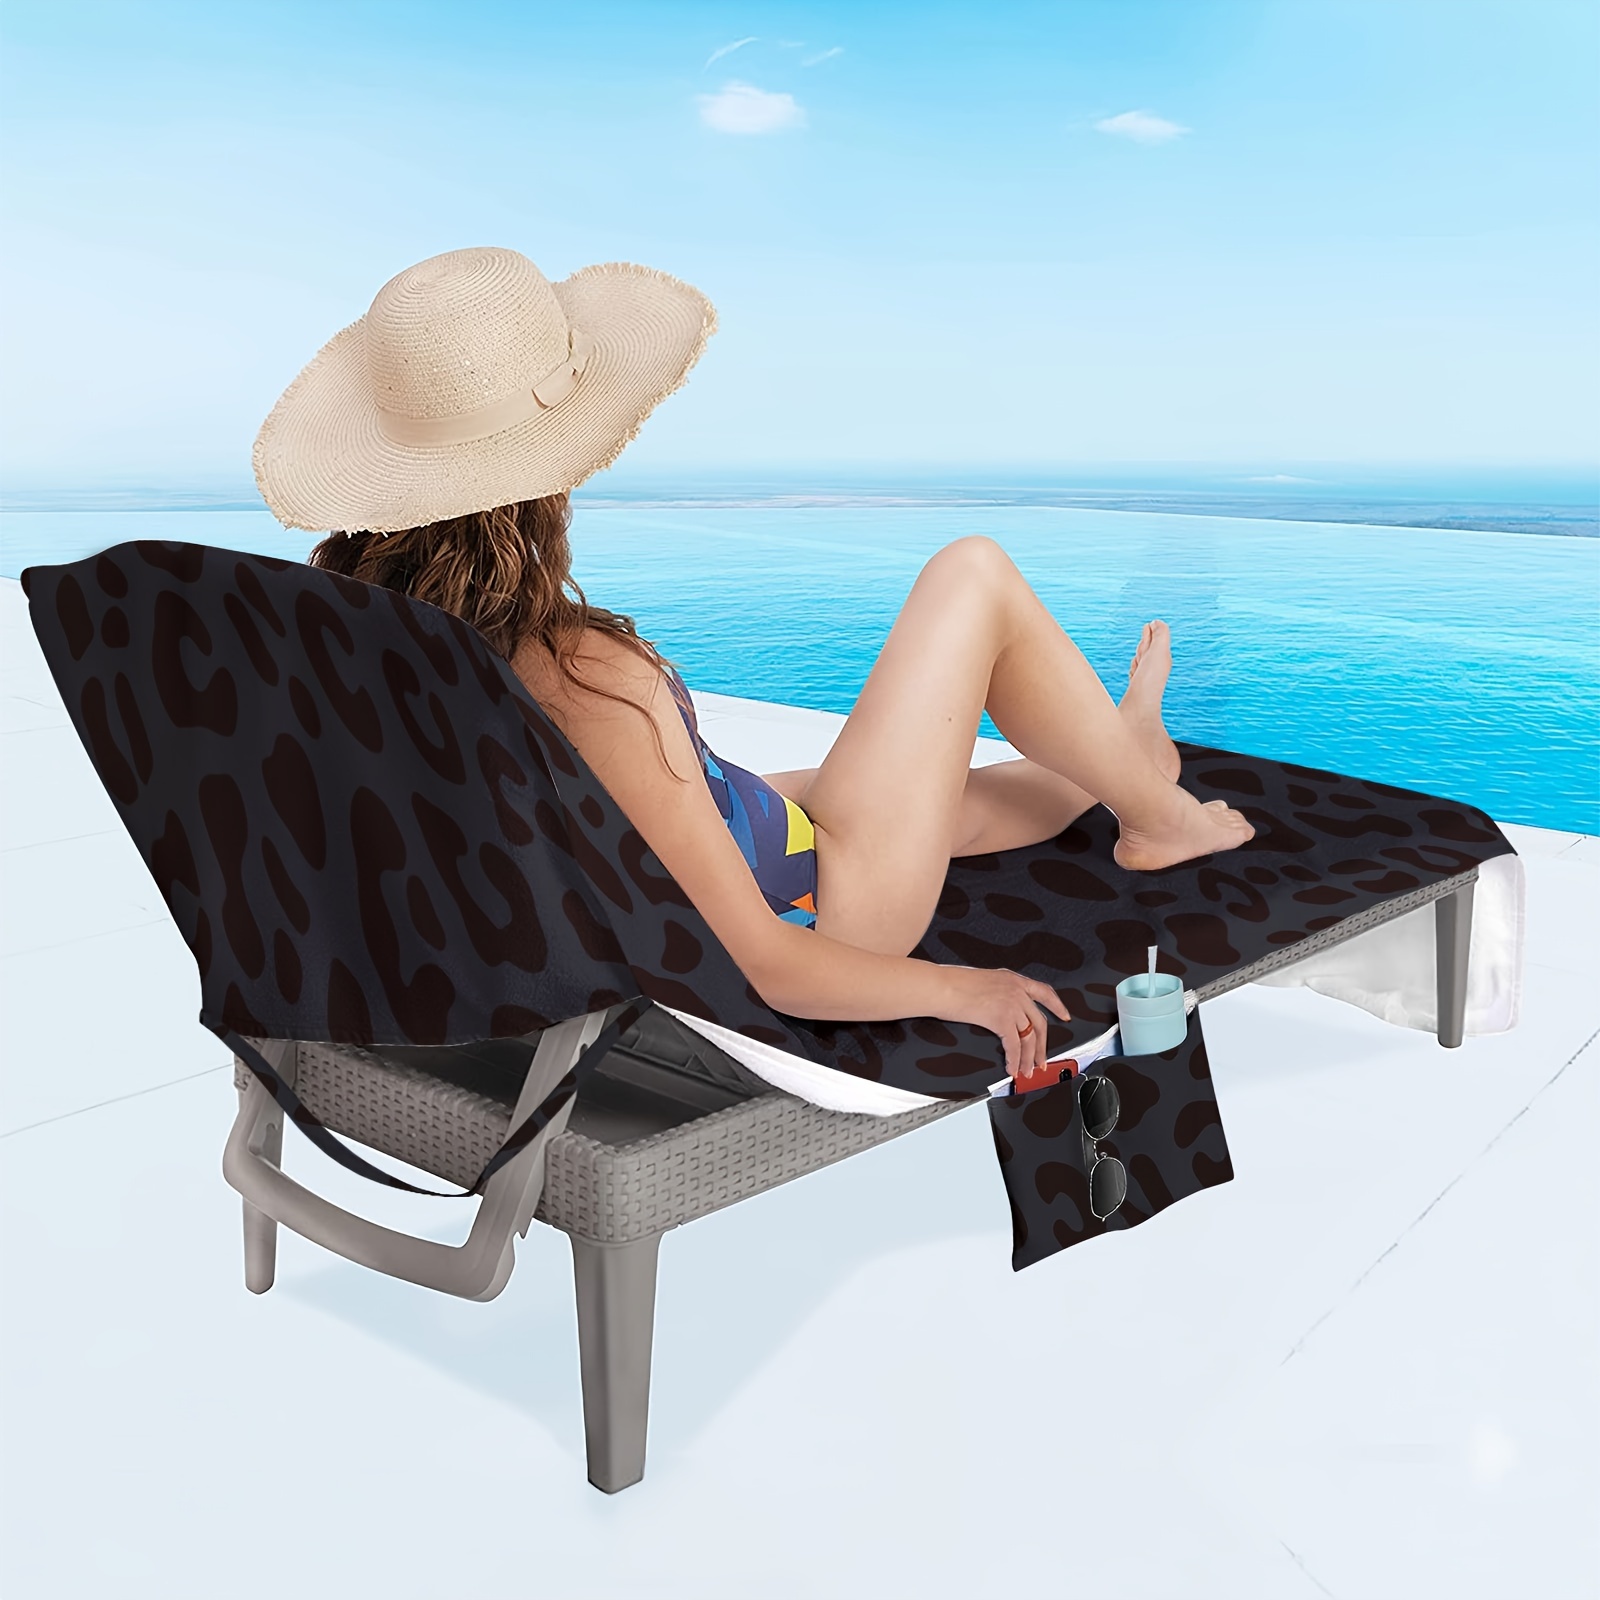 Chillax Beach Chair Pool Towels - A Must Have on a Cruise Ship for Men and  Women. Towel Accessories Include Pillow and Side Pockets. No Clips Needed.